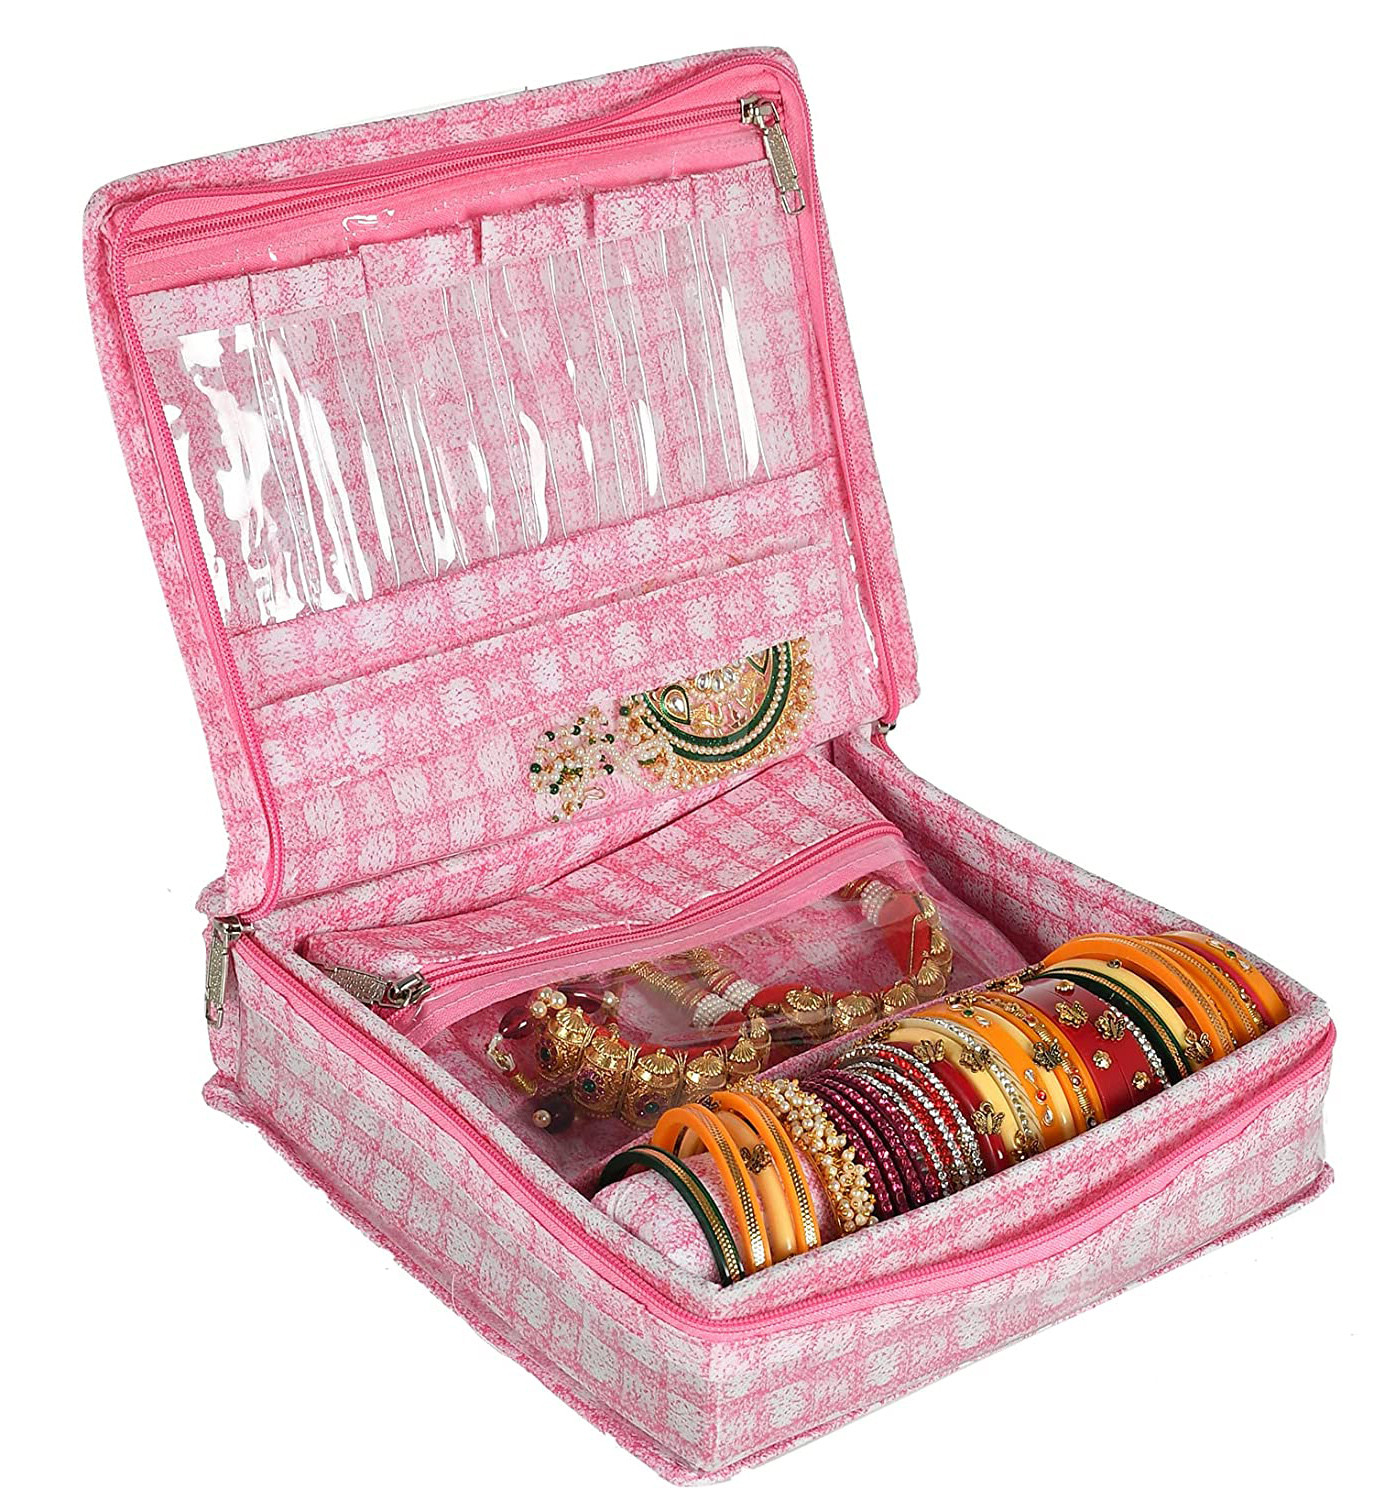 Kuber Industries Jewellery Kit | Check Design Vanity Box for woman | Laminated Jewellery Kit with Support | Jewellery Kit with 5 Pouch & Bangle Roll | Pink